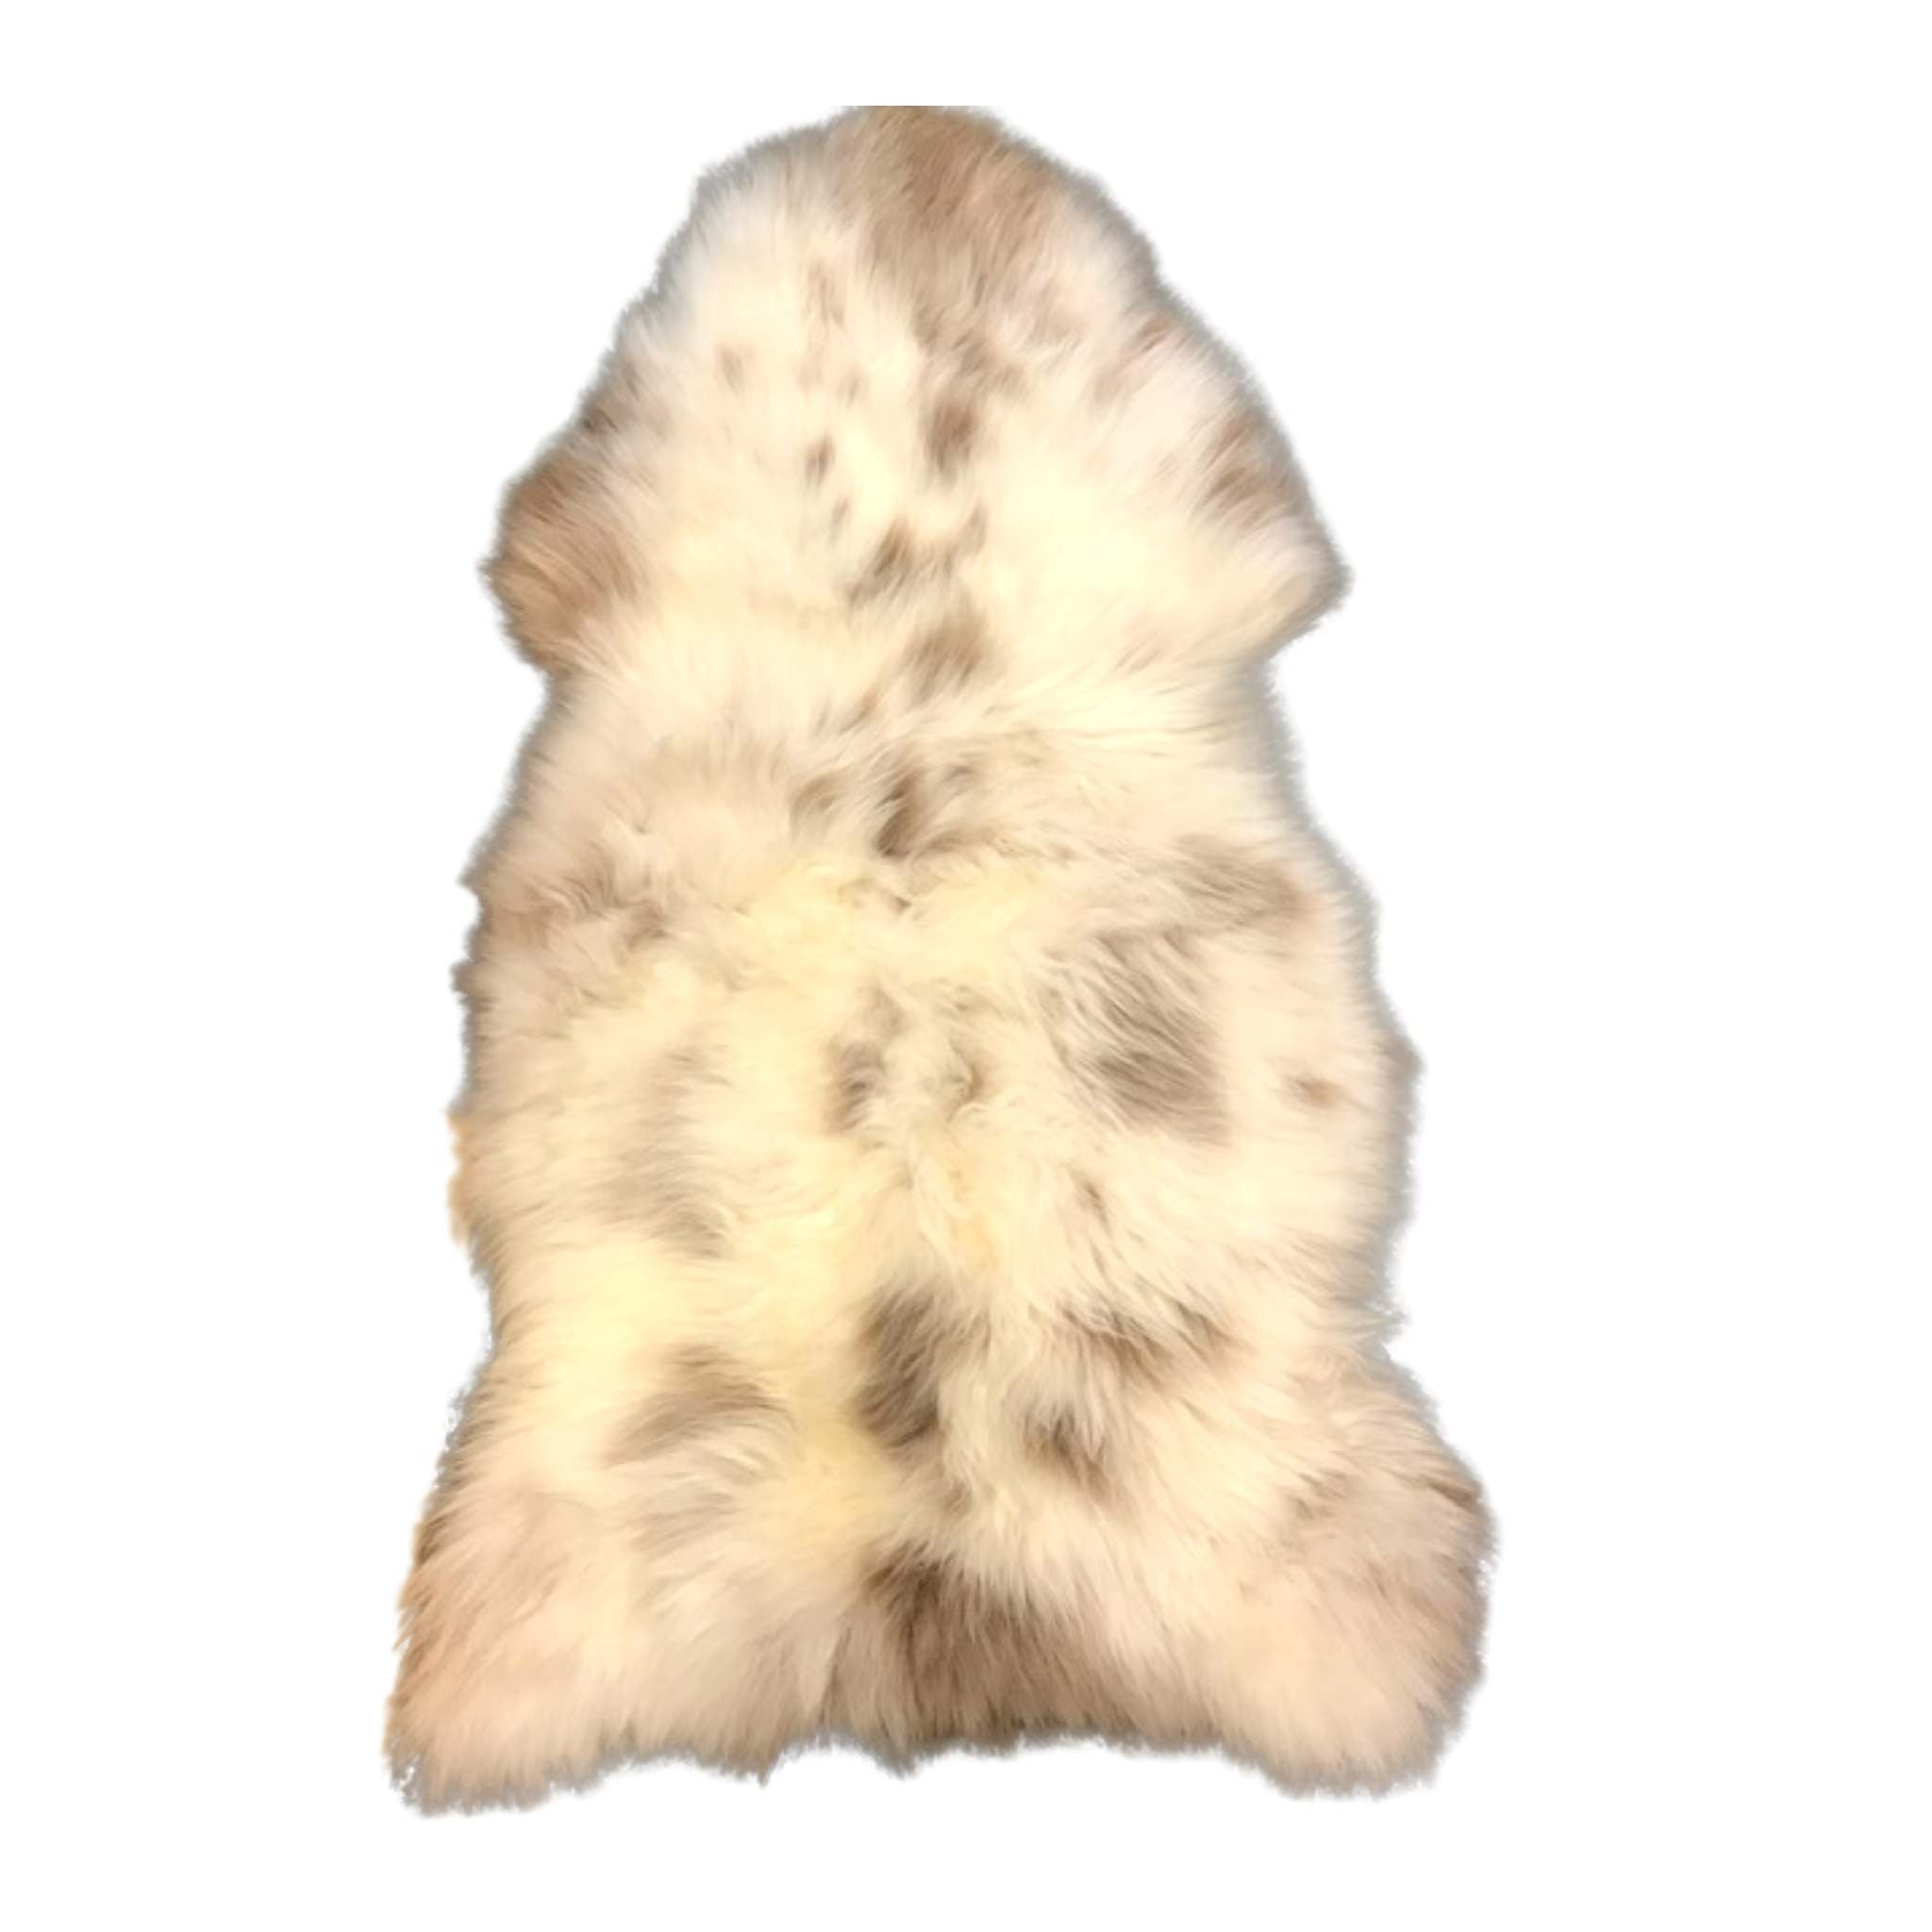 luxurious rare breed sheepskins in natural colourings, ideal for interiors, rugs, re-enactment, TV and film production, costume and more